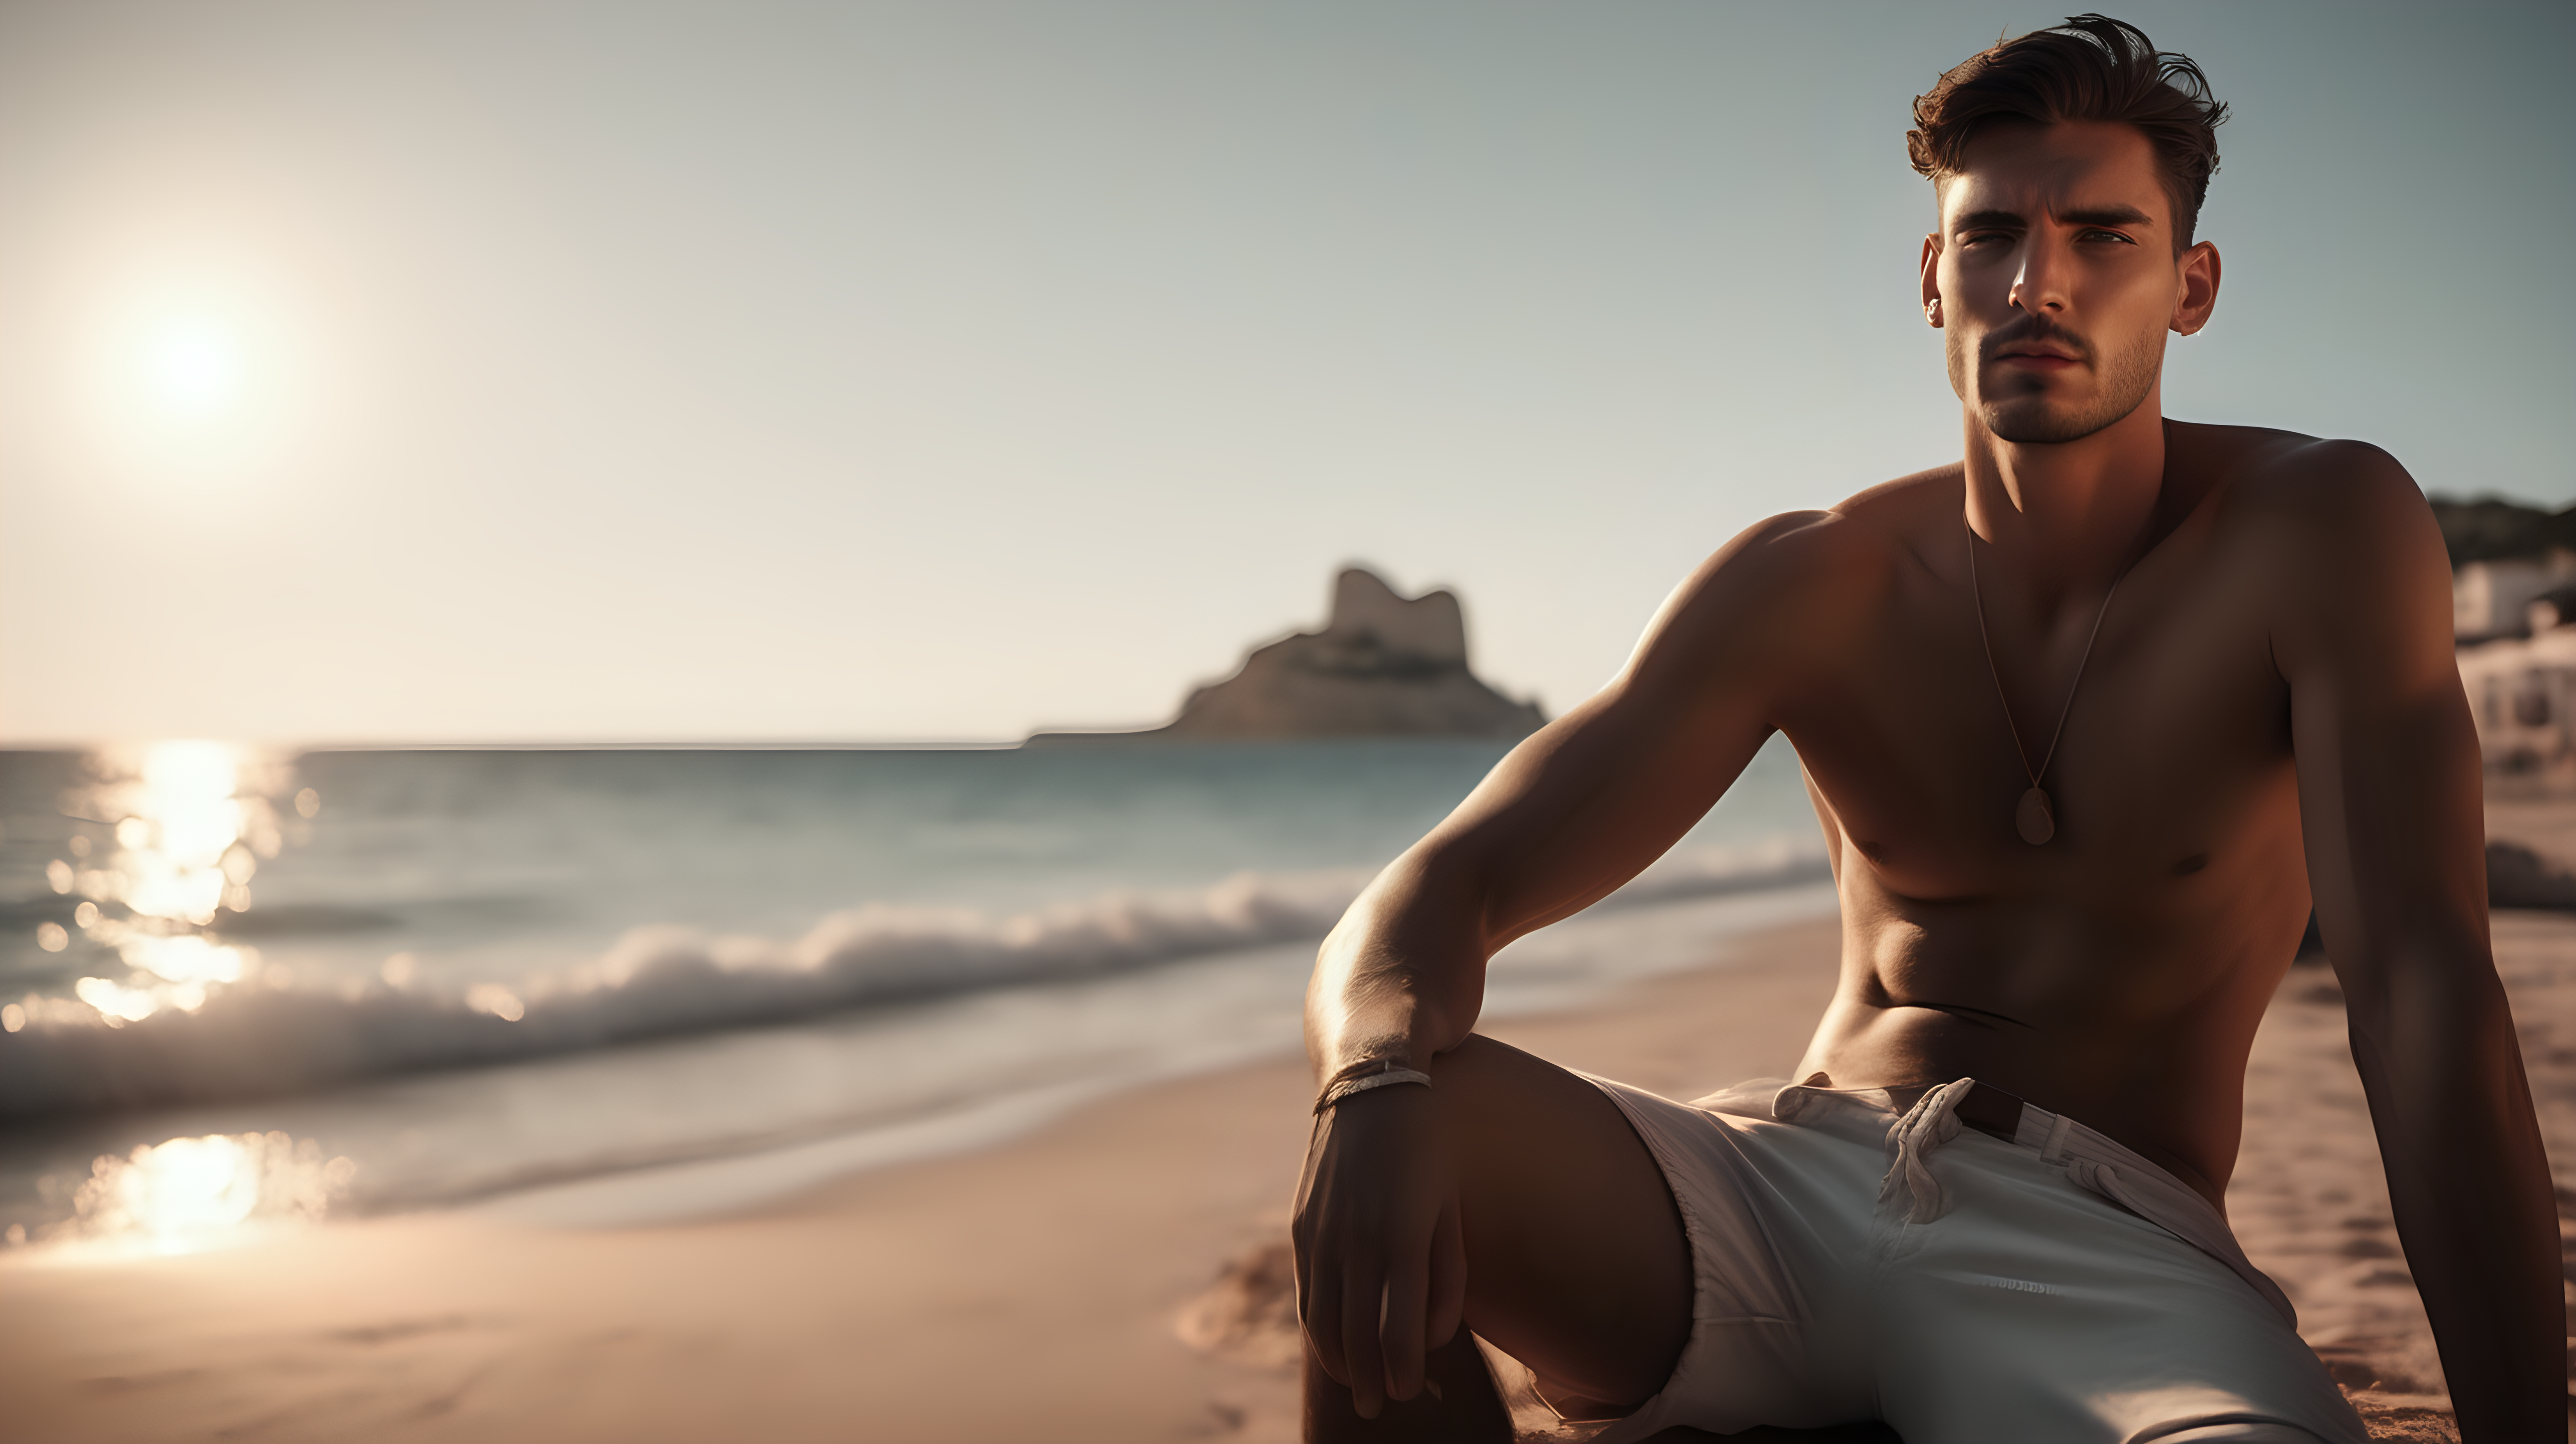 Chill-out, super realistic, ibiza, beach, handsome man. The lighting in the photo should be dramatic. Sharp focus. A ultrarealistic perfect example of cinematic shot. Use muted colors to add to the scene